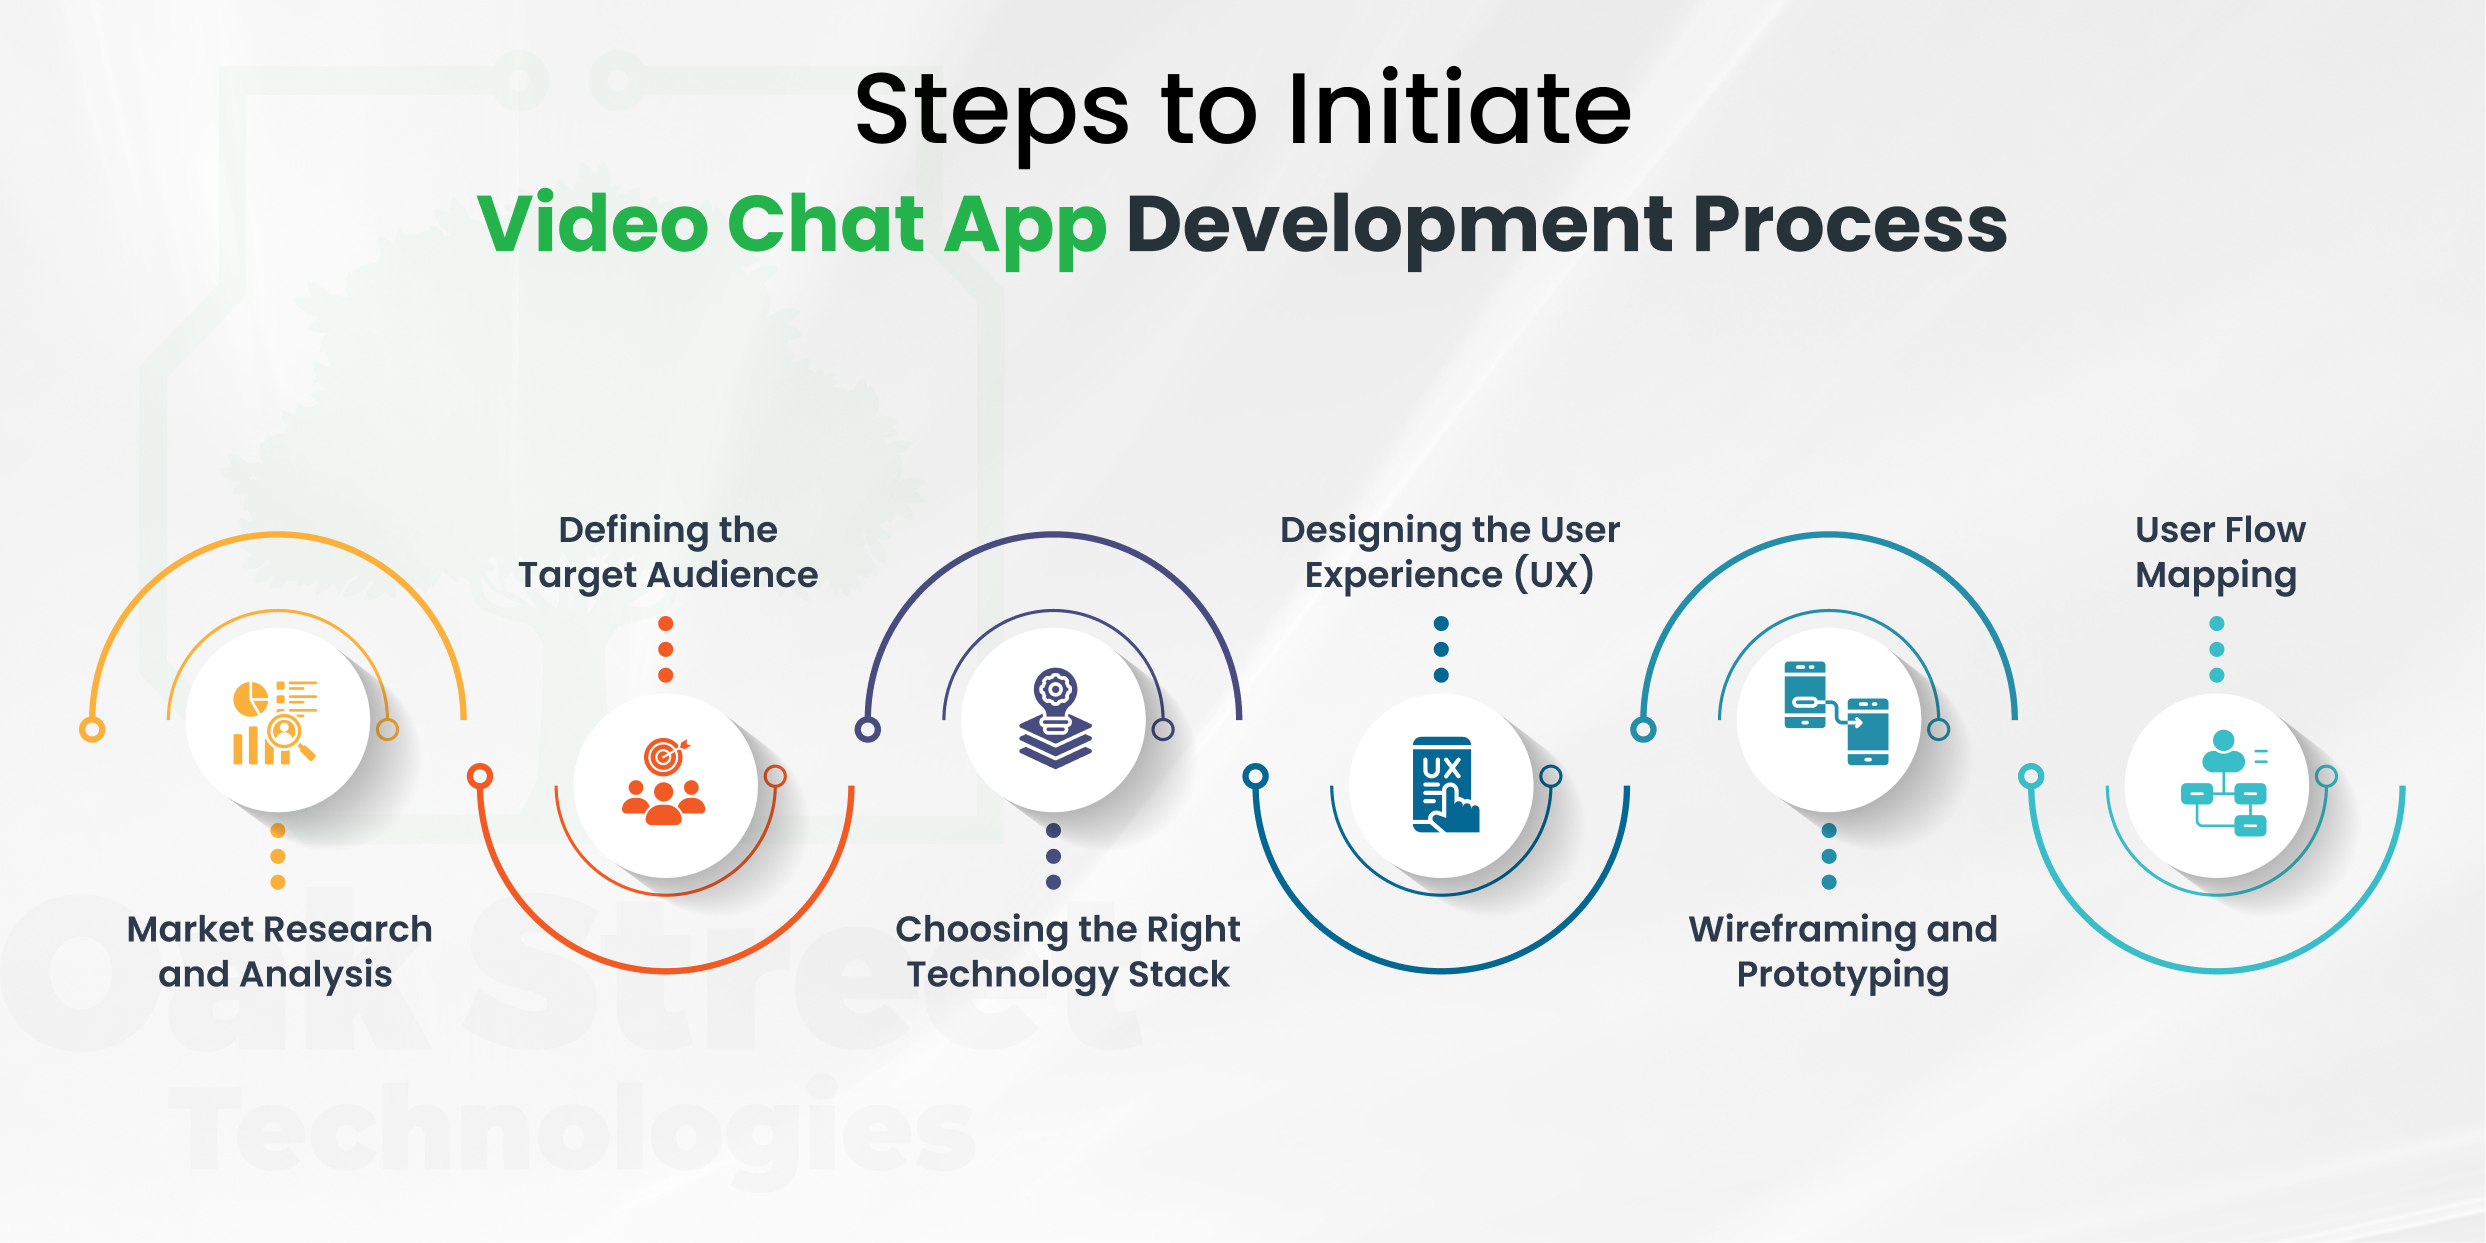 Steps to Initiate Video Chat App Development Process